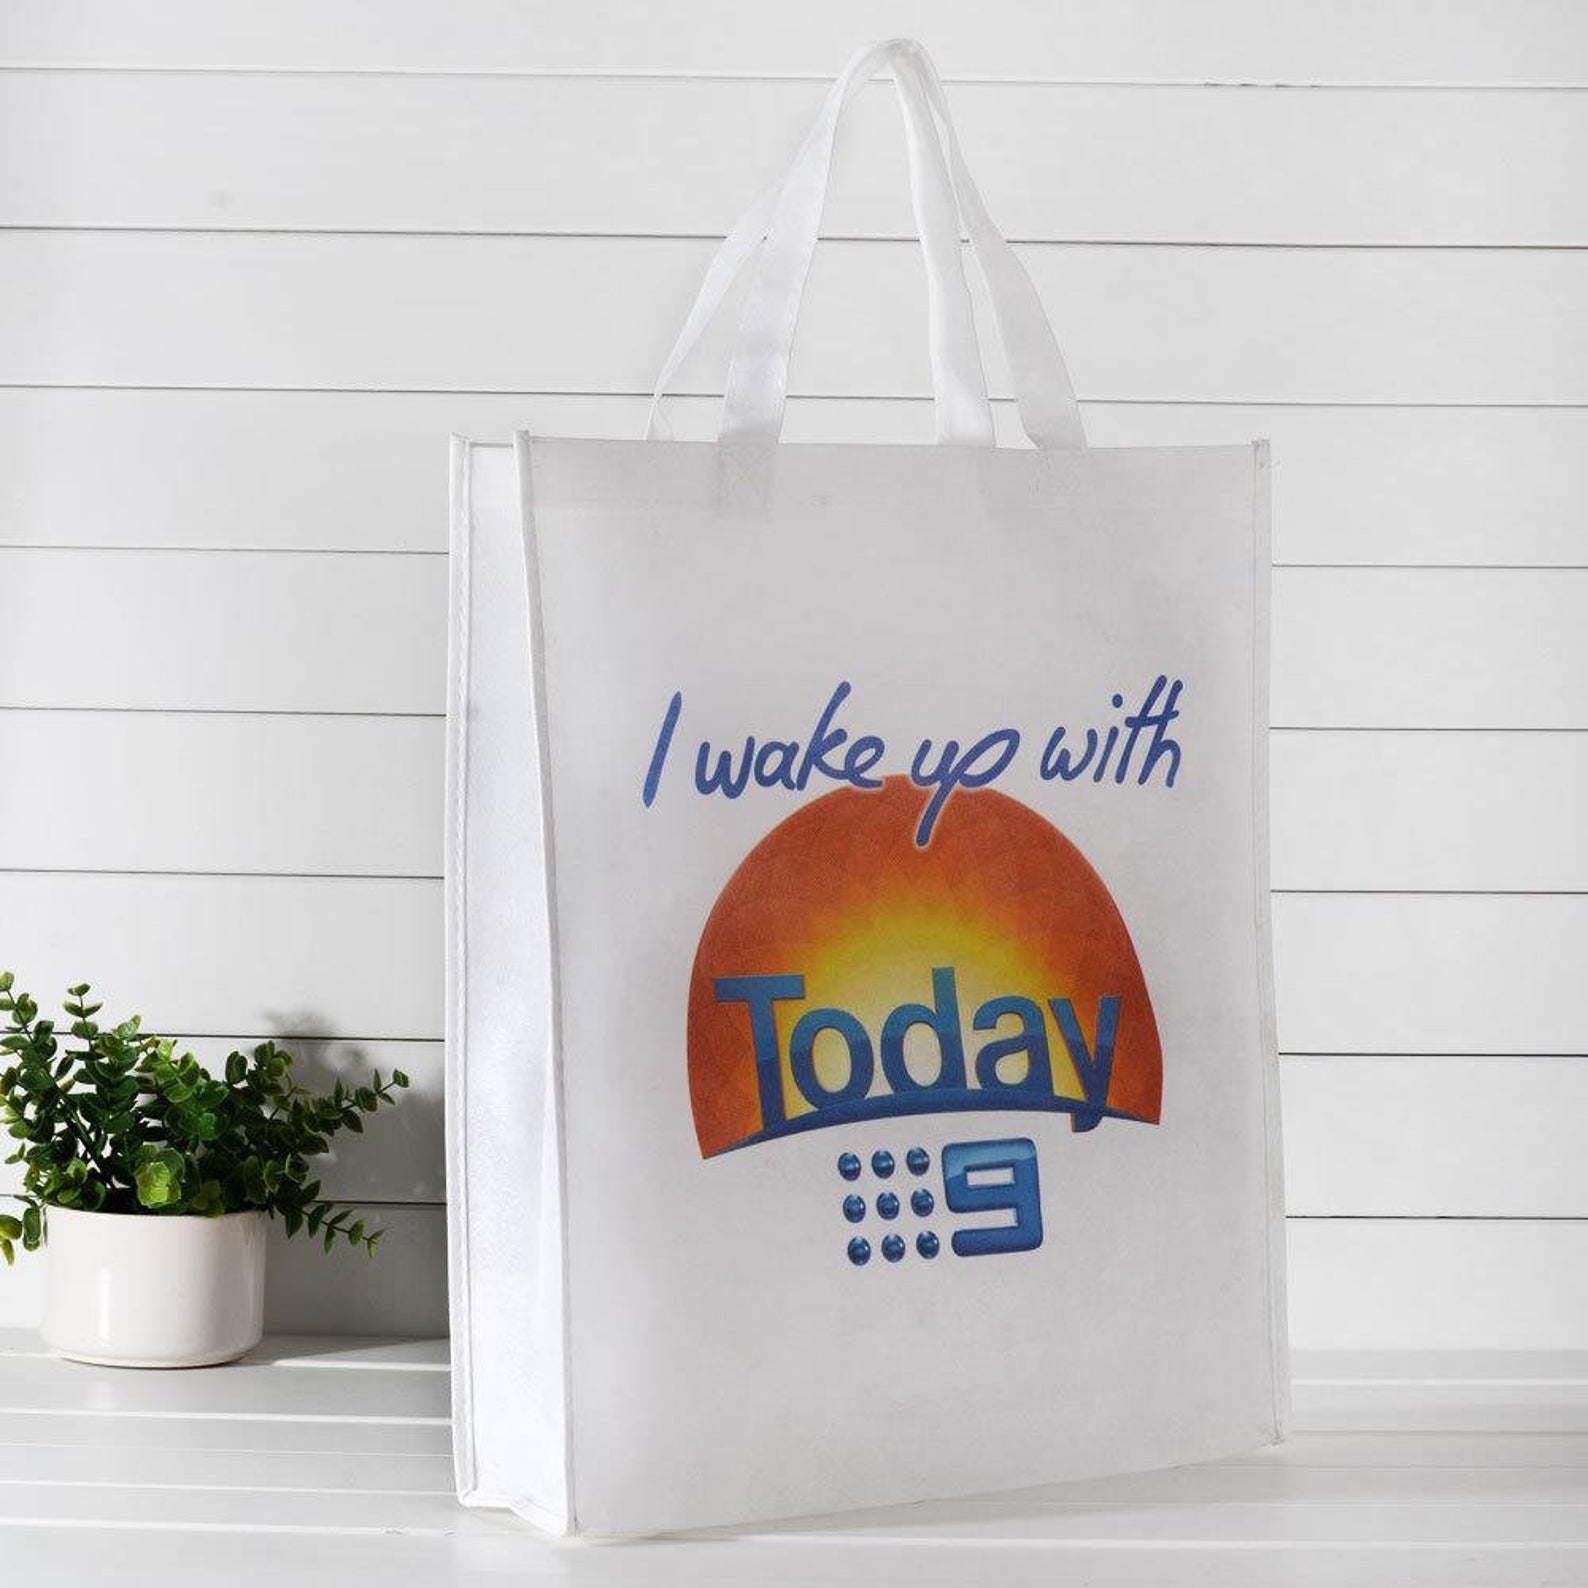 Sublimation Blank Non Woven Tote bags - Ready for Customized Printed Writing - Suitable for Sublimation - Shopping Bag - KULTURE PRINT HOUSE